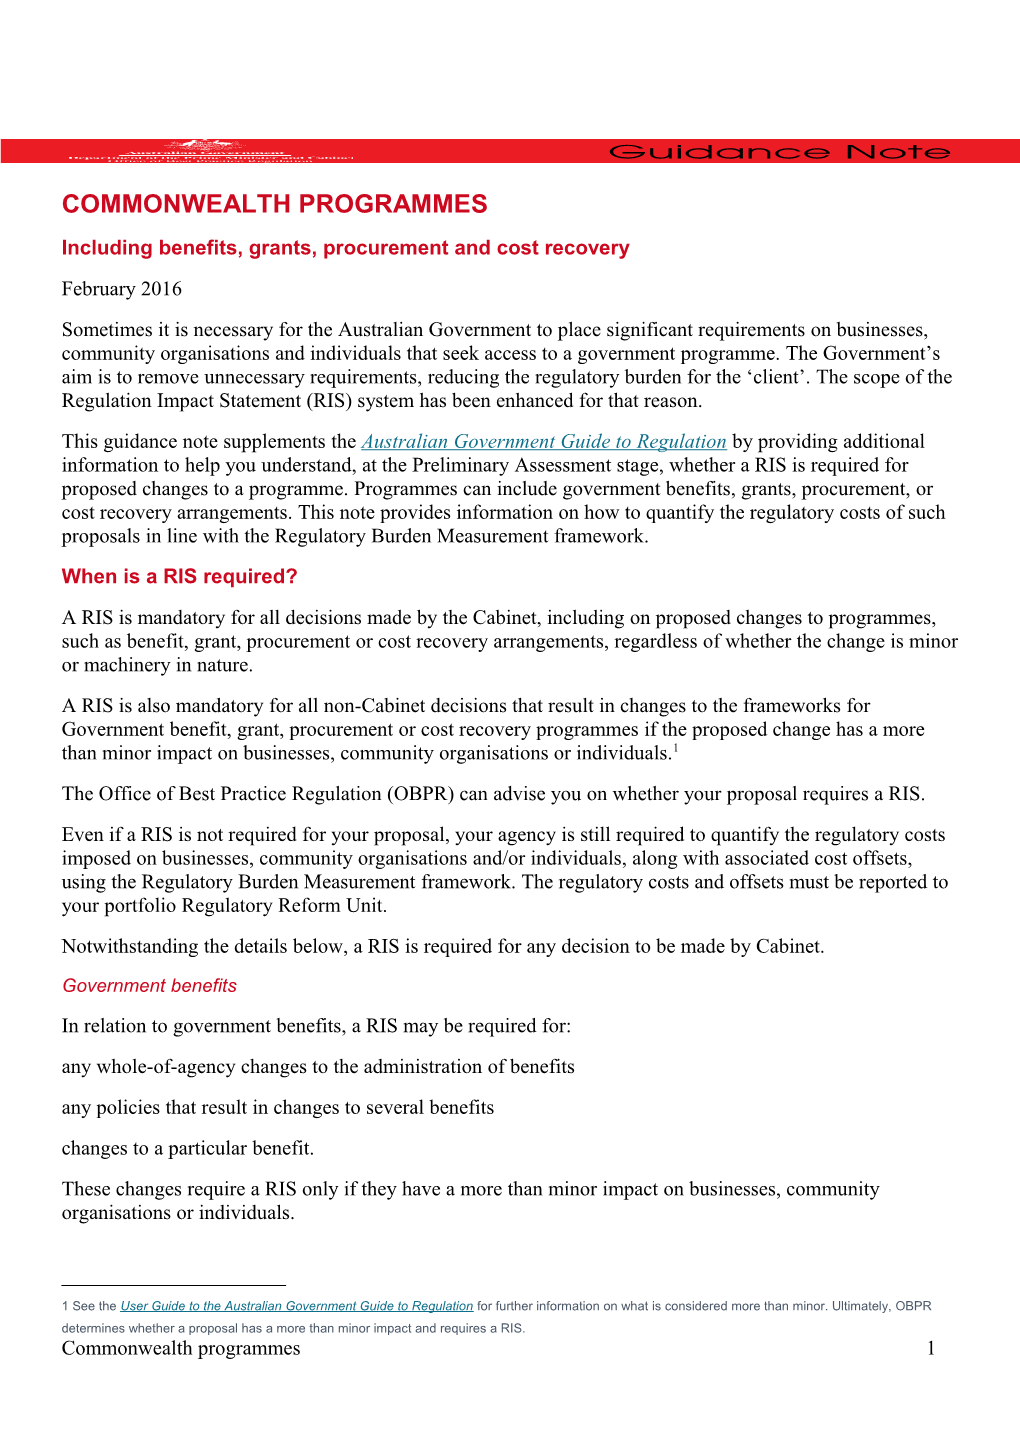 Commonwealth Programmes Guidance Note